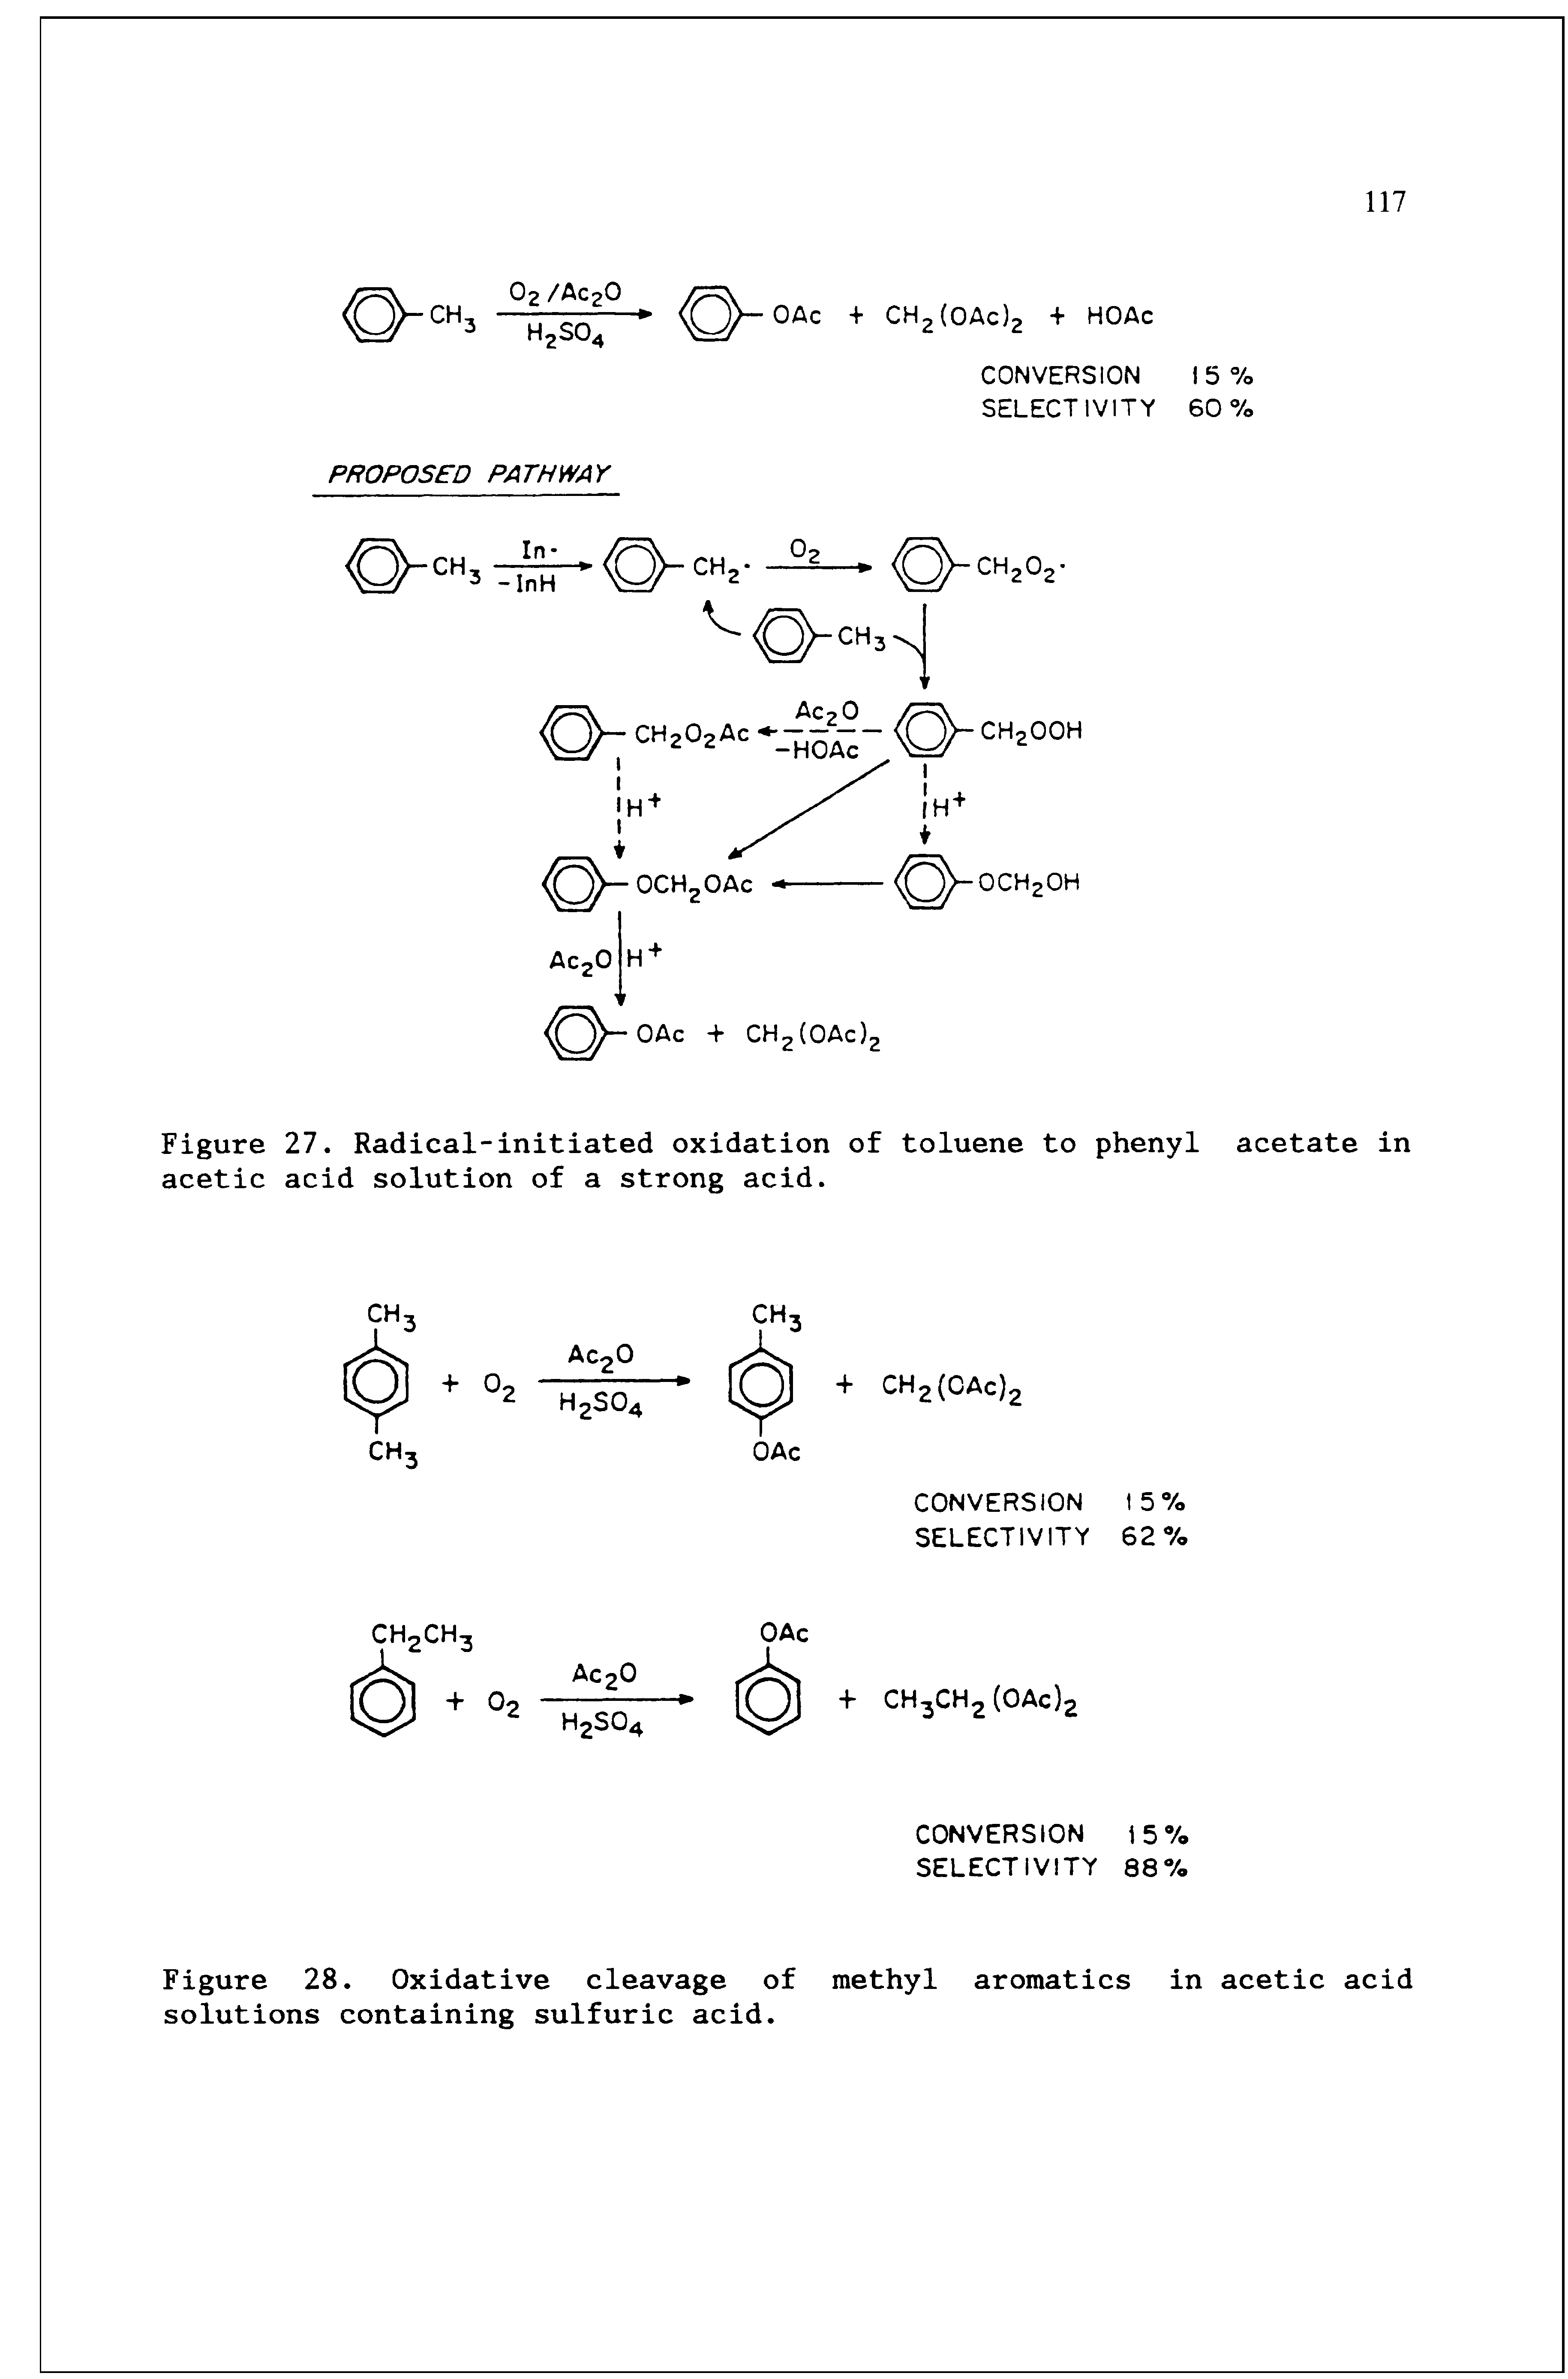 Figure 28. Oxidative cleavage of methyl aromatics in acetic acid solutions containing sulfuric acid.